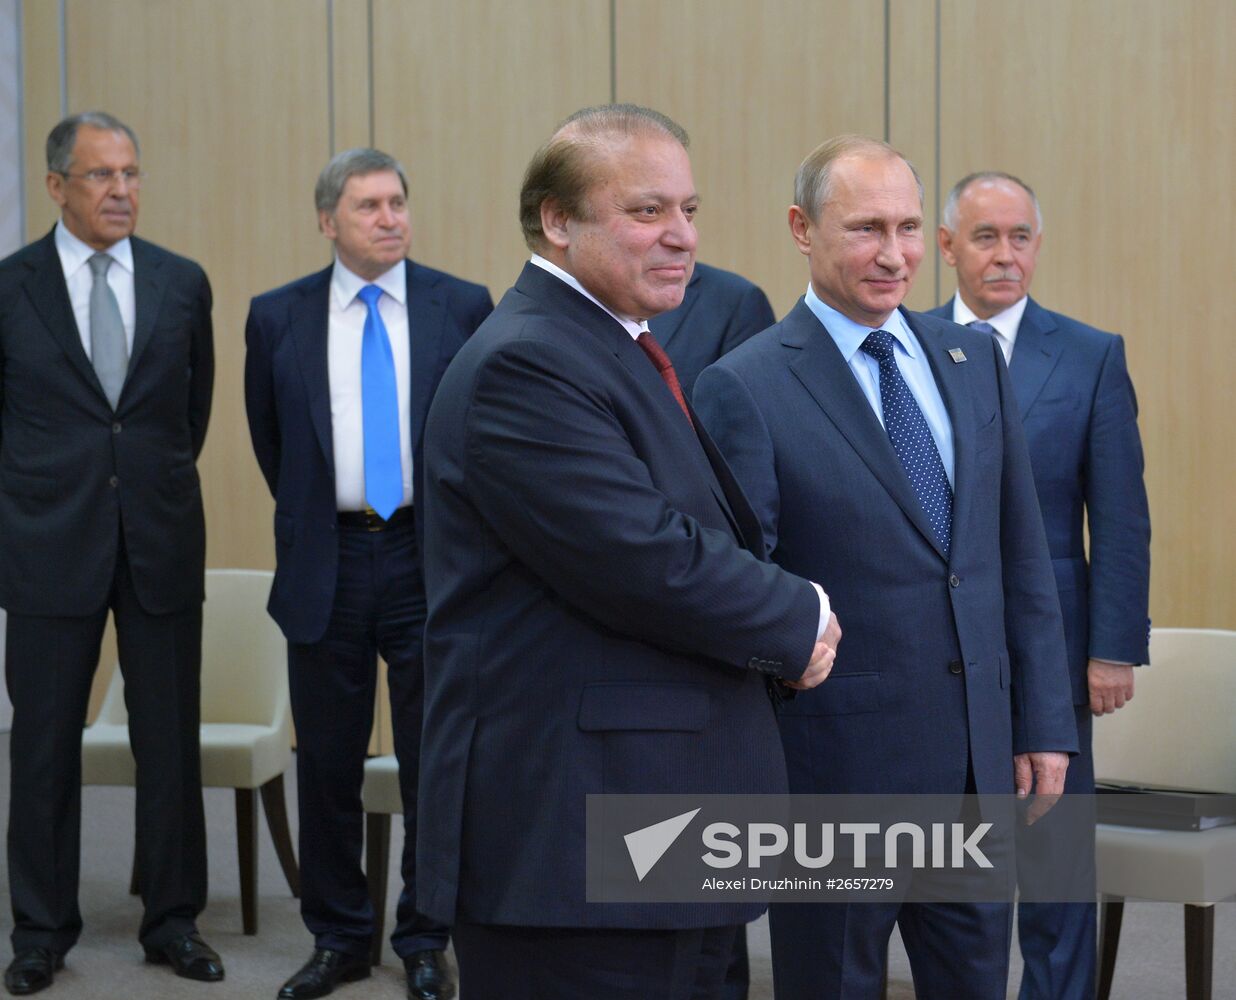 President of the Russian Federation Vladimir Putin meets with Nawaz Sharif, Prime Minister of the Islamic Republic of Pakistan